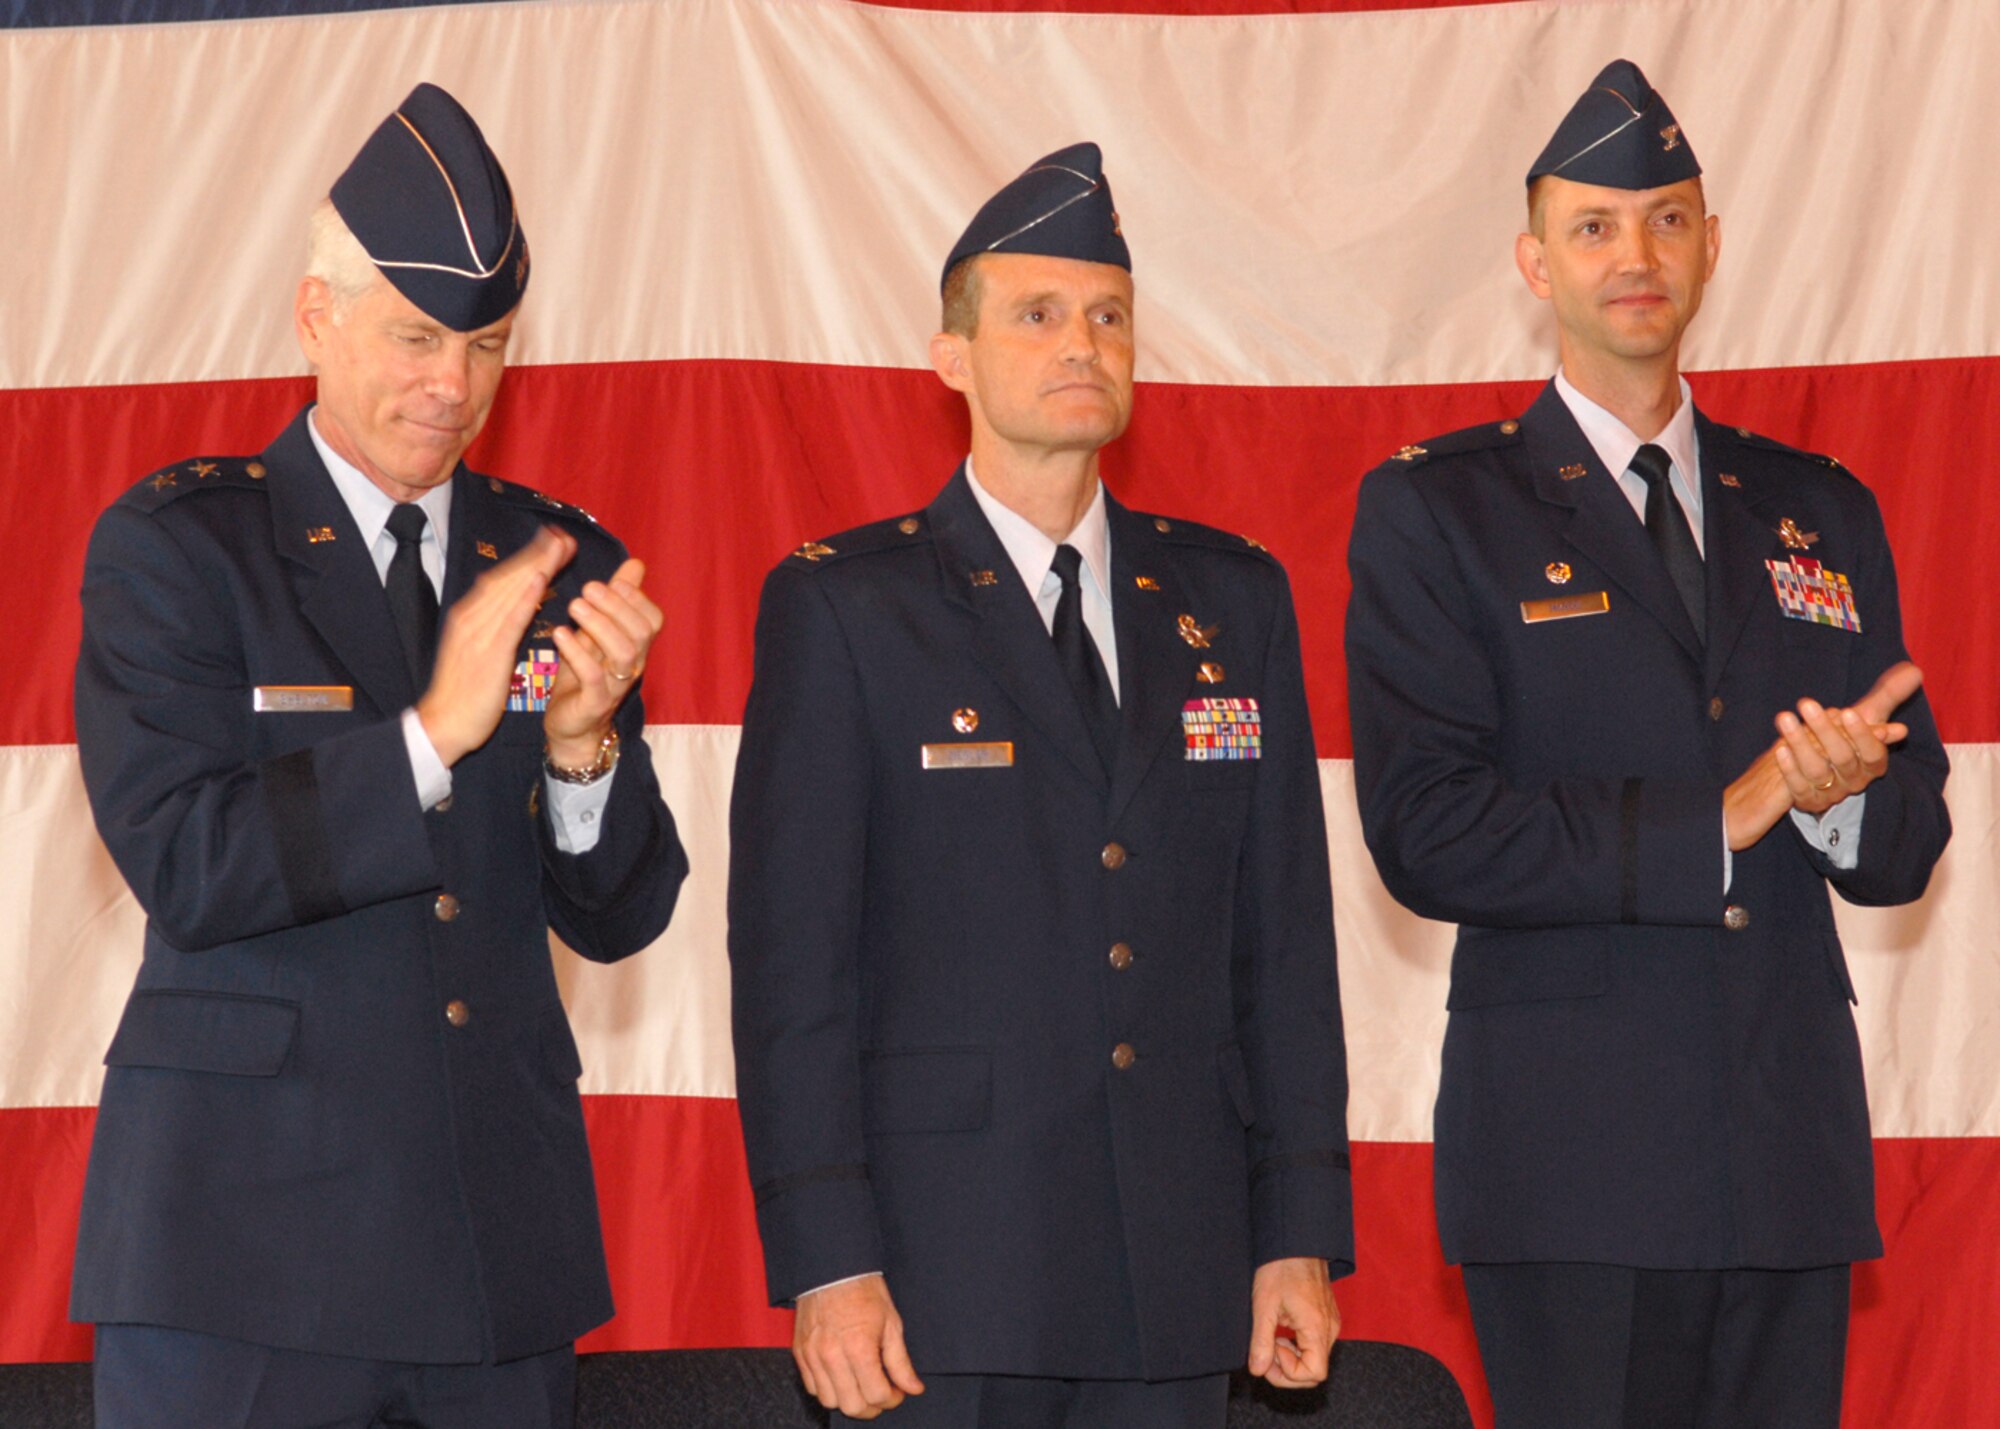 BUCKLEY AIR FORCE BASE, Colo. -- Maj. Gen. William Shelton (left), 14th Air Force commander, and Col. Donald "Wayne" McGee Jr. (right) applaud outgoing 460th Space Wing Commander Col. David W. Ziegler on his many accomplishments during his career and tenure as wing commander during a change of command ceremony June 12 at Hangar 909 here. Colonel McGee replaced Colonel Ziegler who is retiring after 25 years of service. (U.S. Air Force photo by Senior Airman LaDonnis Crump)